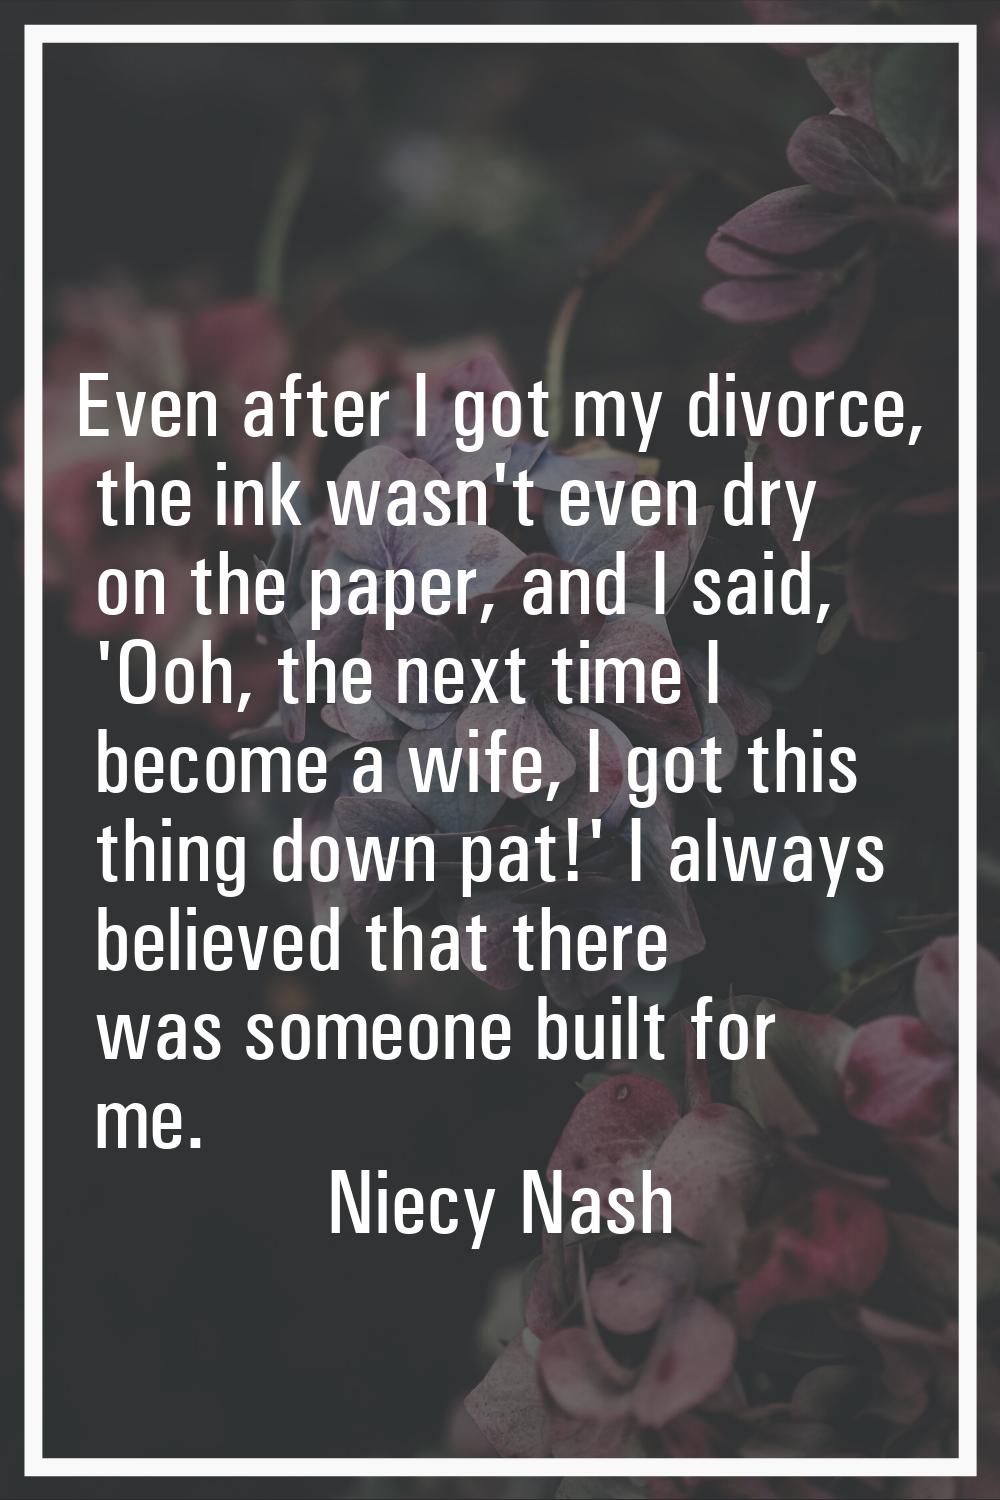 Even after I got my divorce, the ink wasn't even dry on the paper, and I said, 'Ooh, the next time 